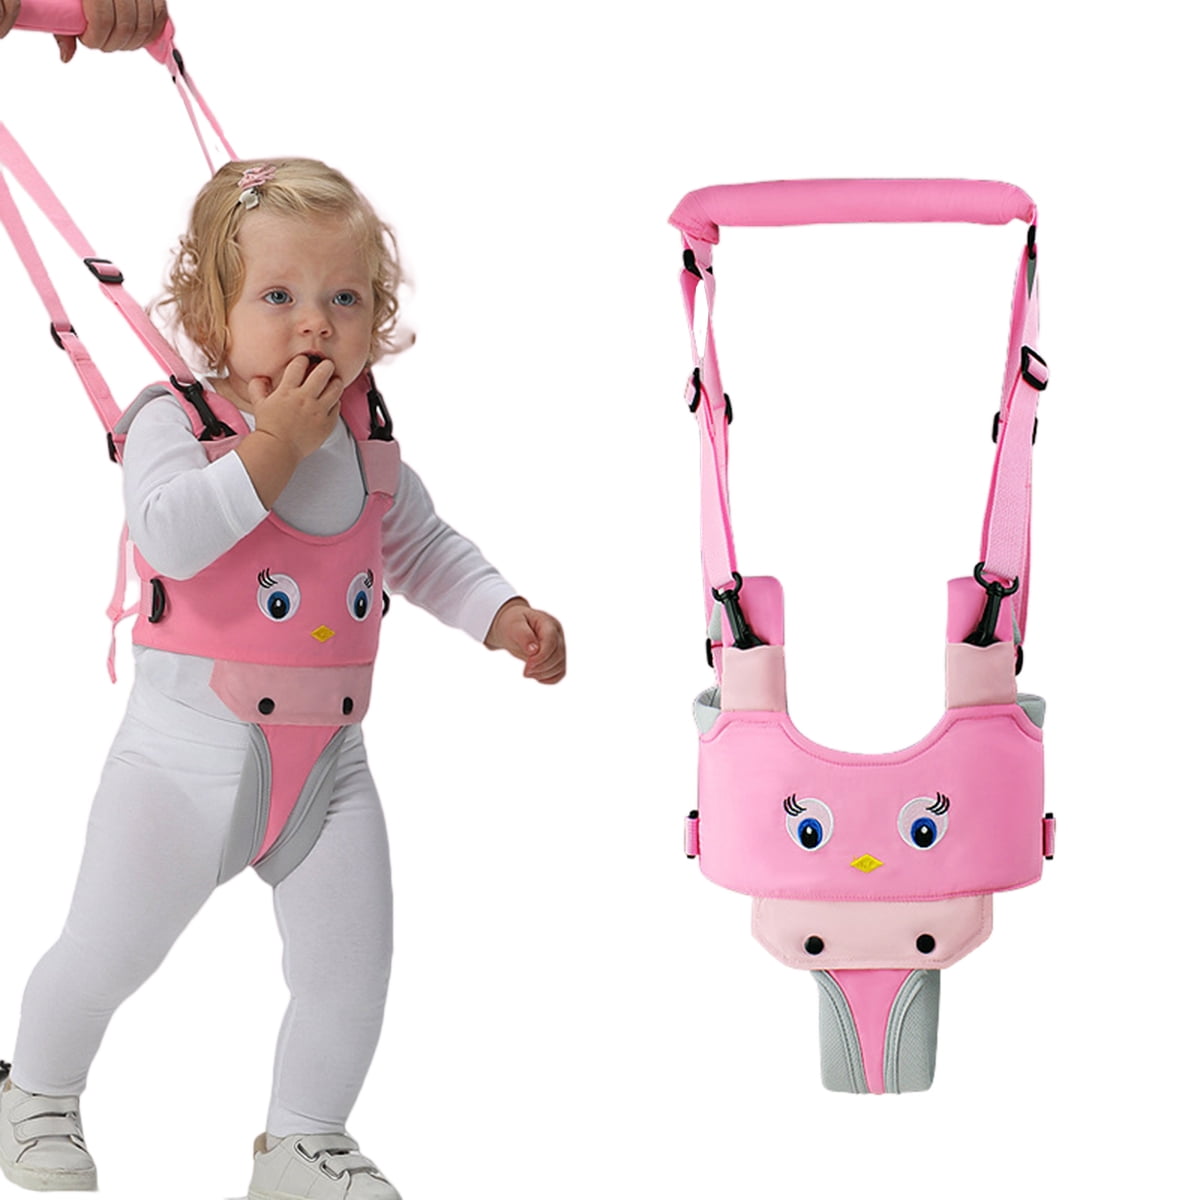 Baby Walking Harness Handheld Baby Walker Kids Adjustable Baby Walking Harness Safety Harnesses Pulling And Lifting Dual Use 7-24 Month Breathable Stand Up For Infant Child Activity Walker GREEN